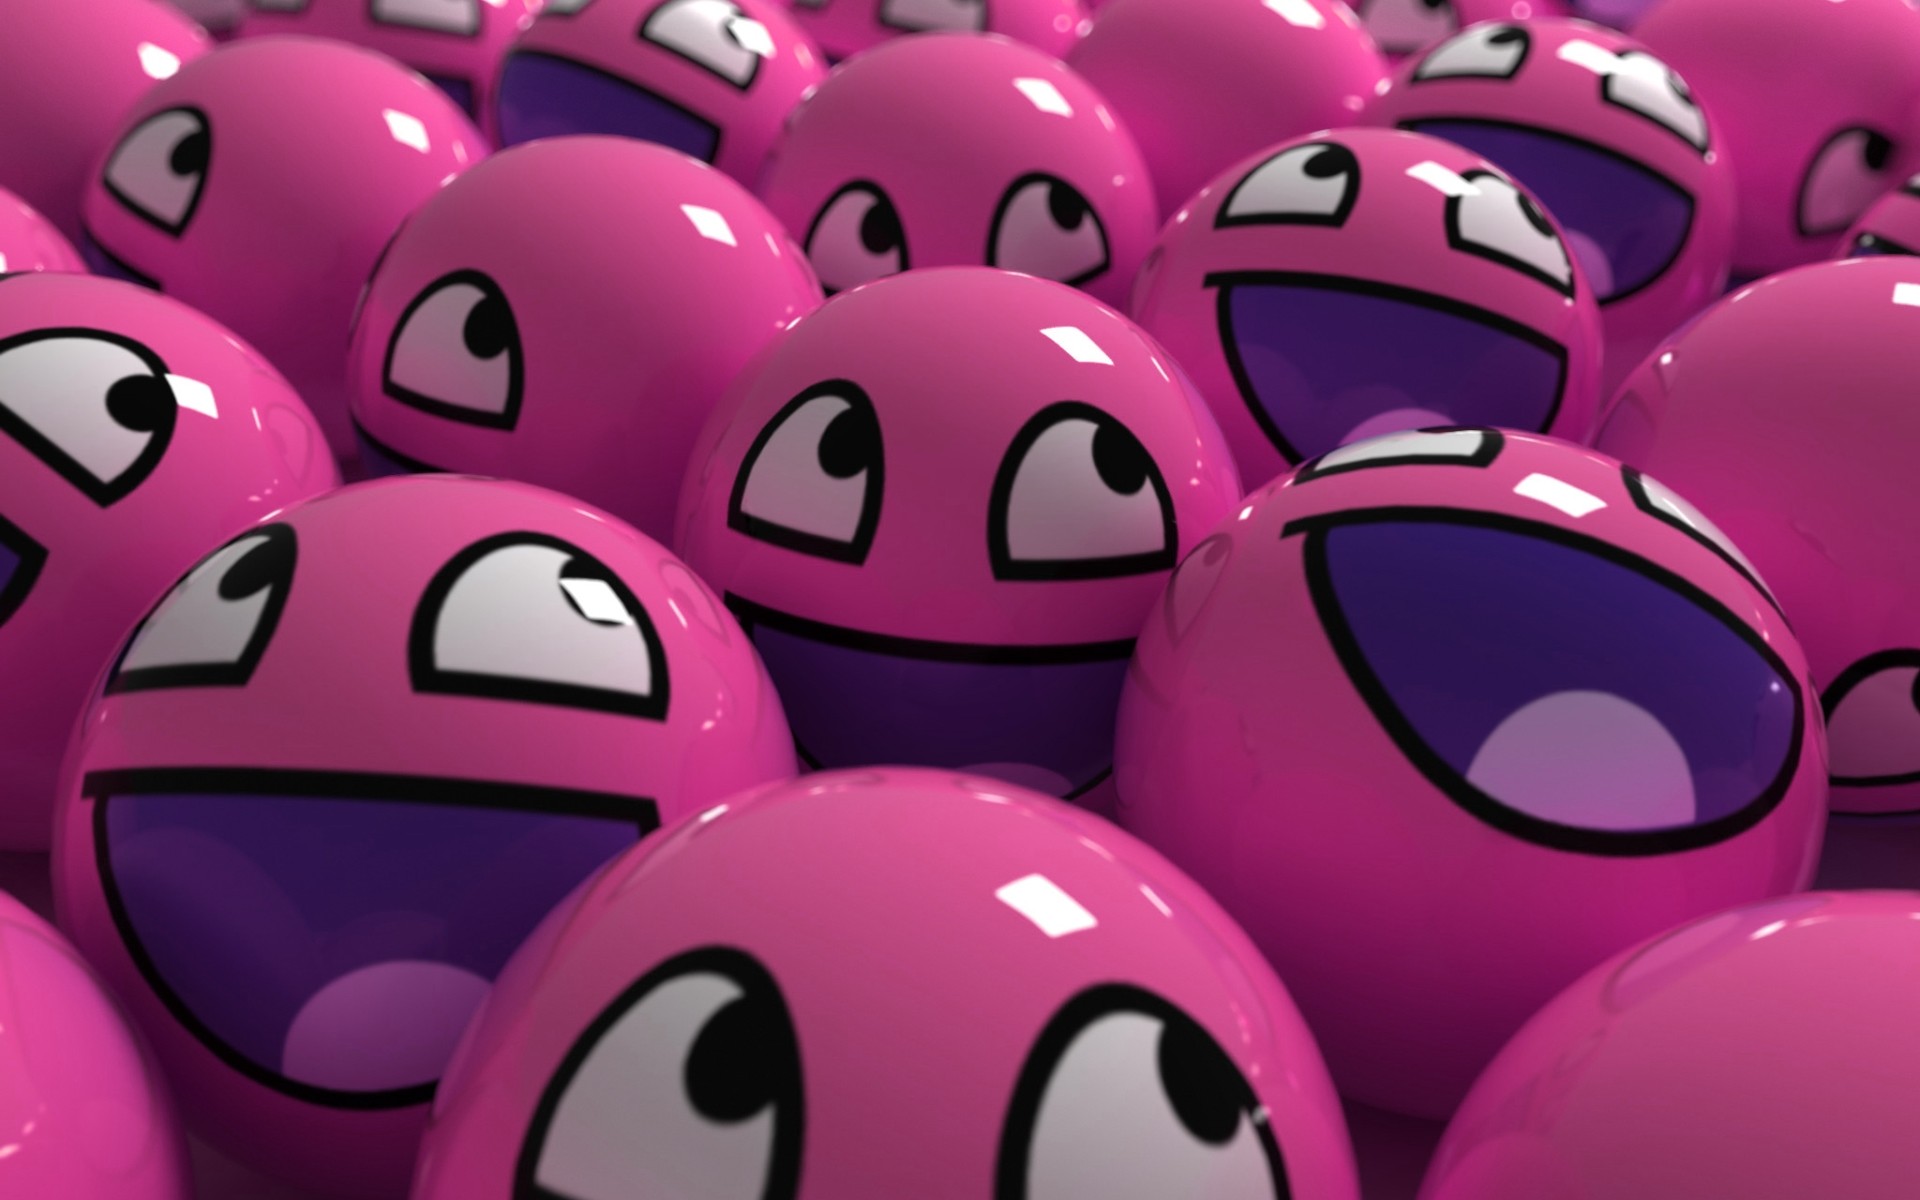 Pink Smiley Faces - 1920x1200 Wallpaper 